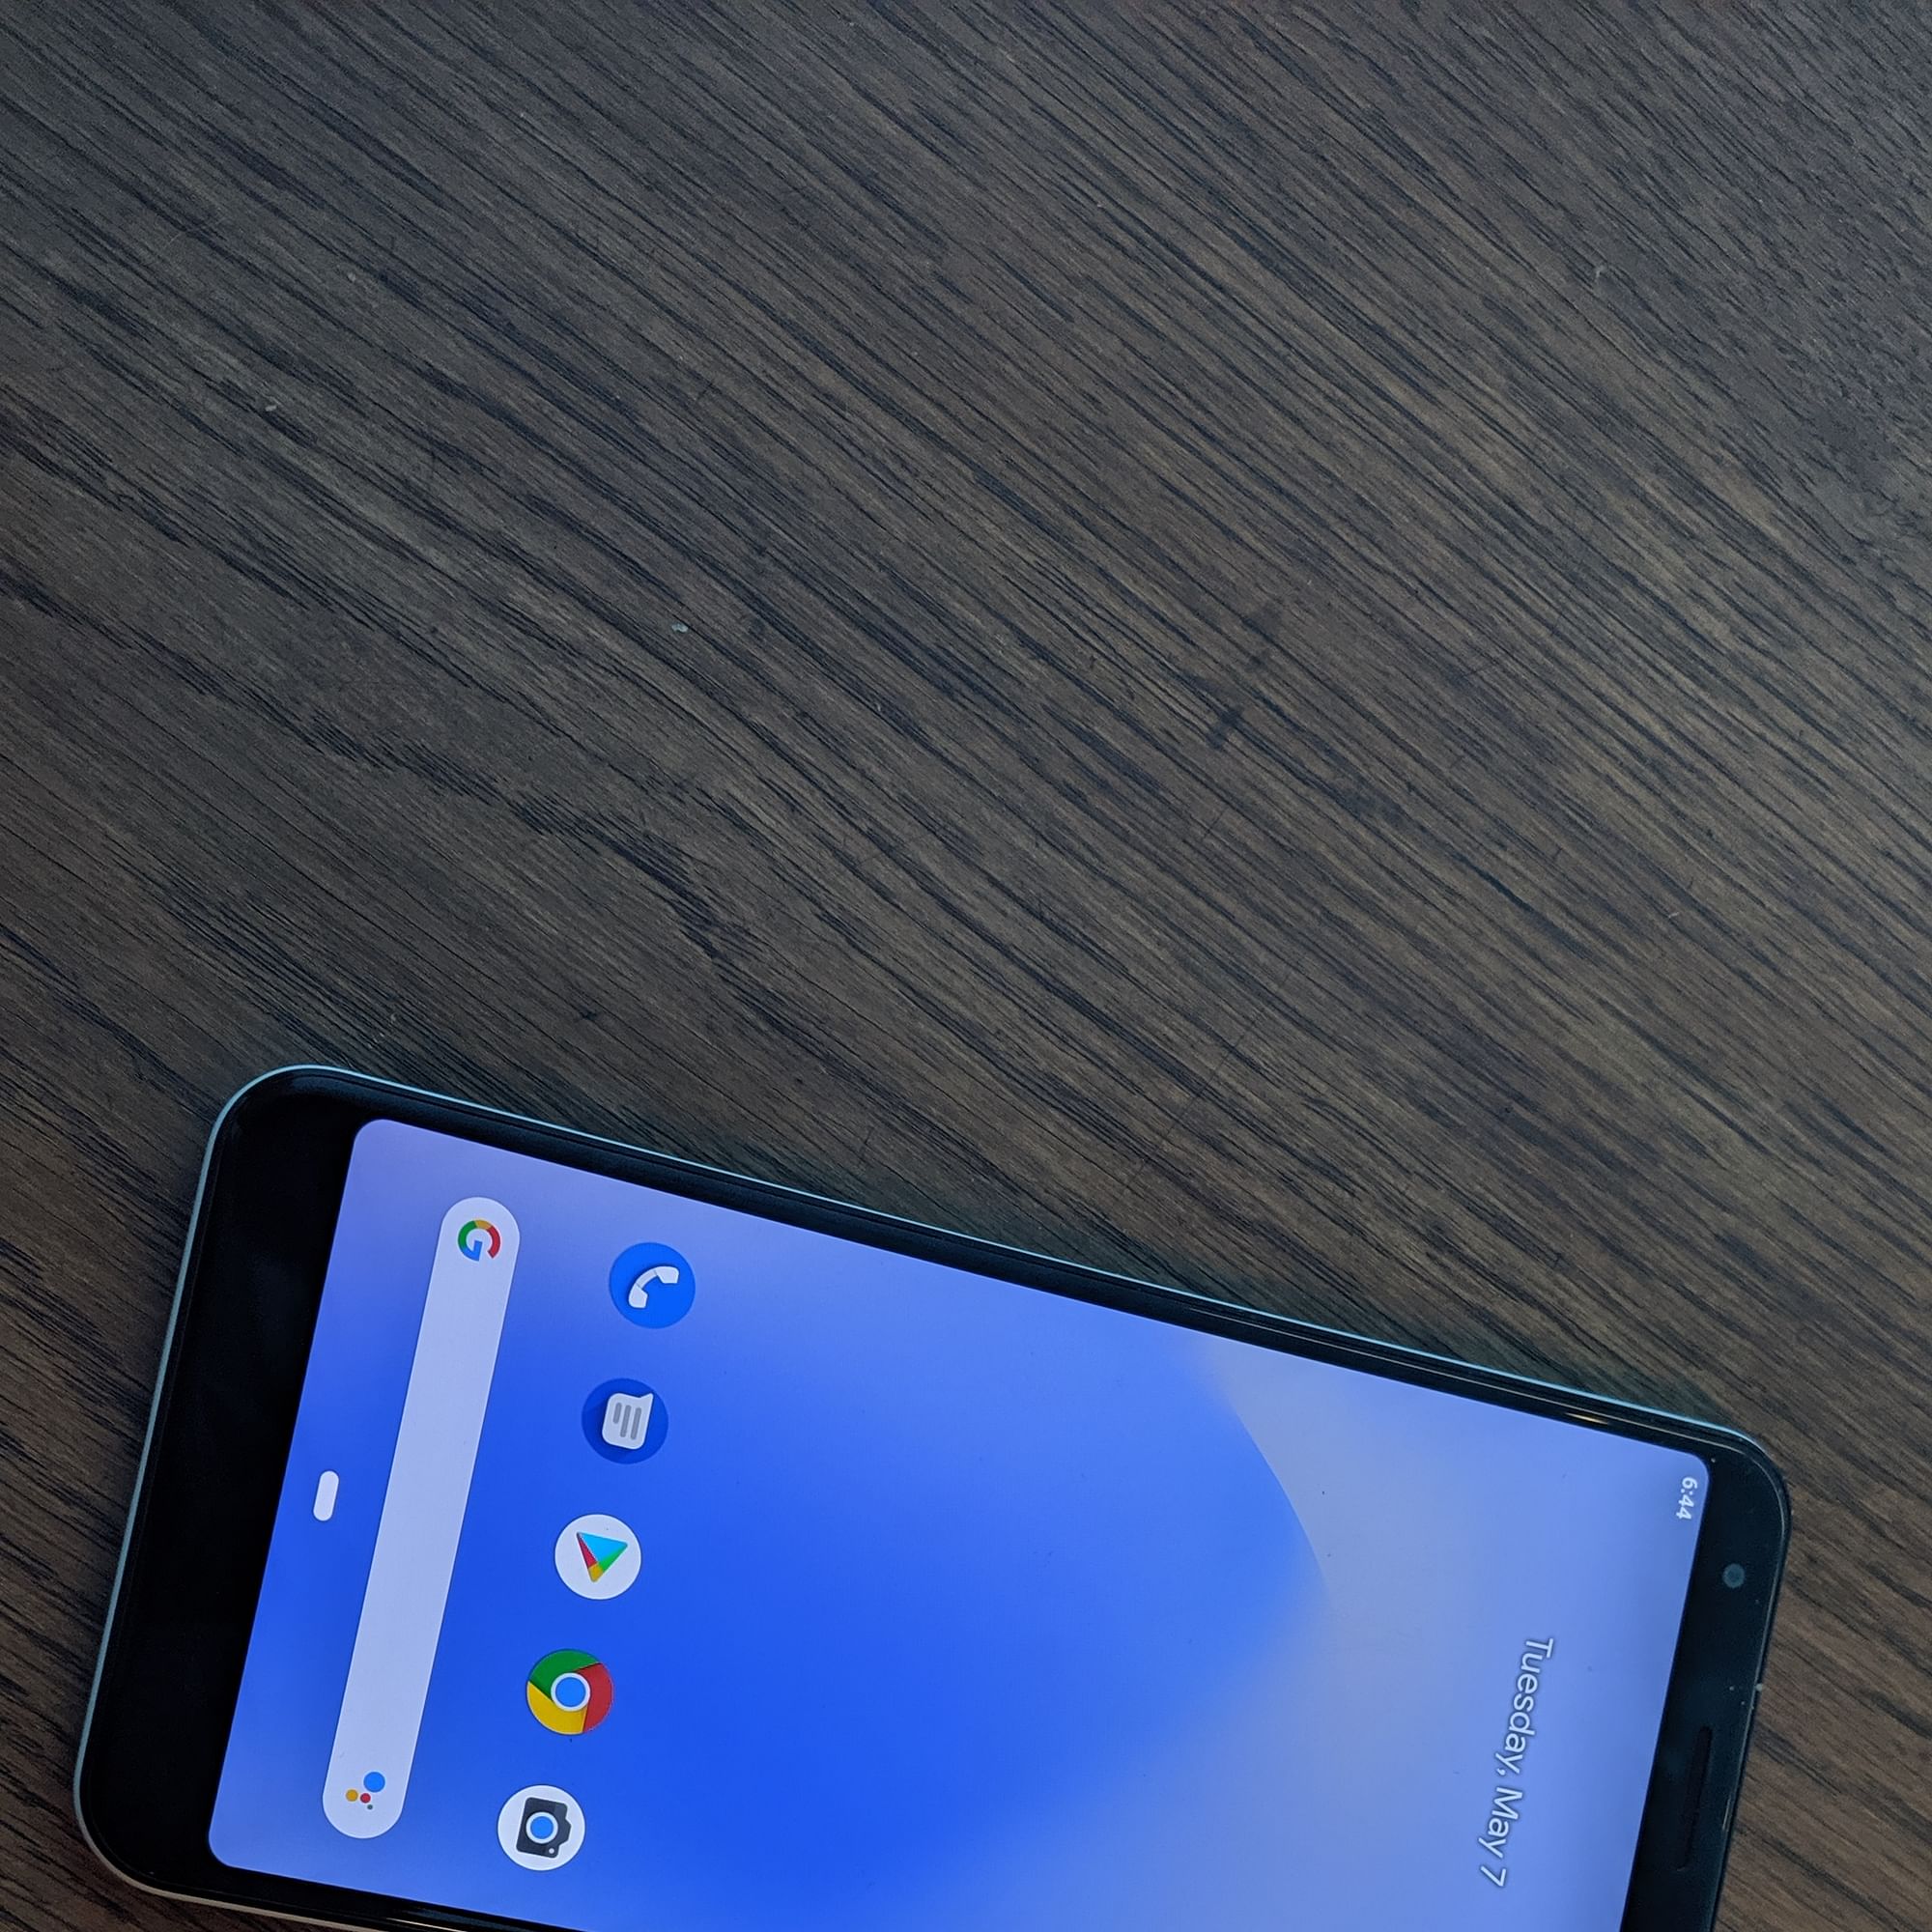 Google has launched Pixel 3a and Pixel 3a XL in India.